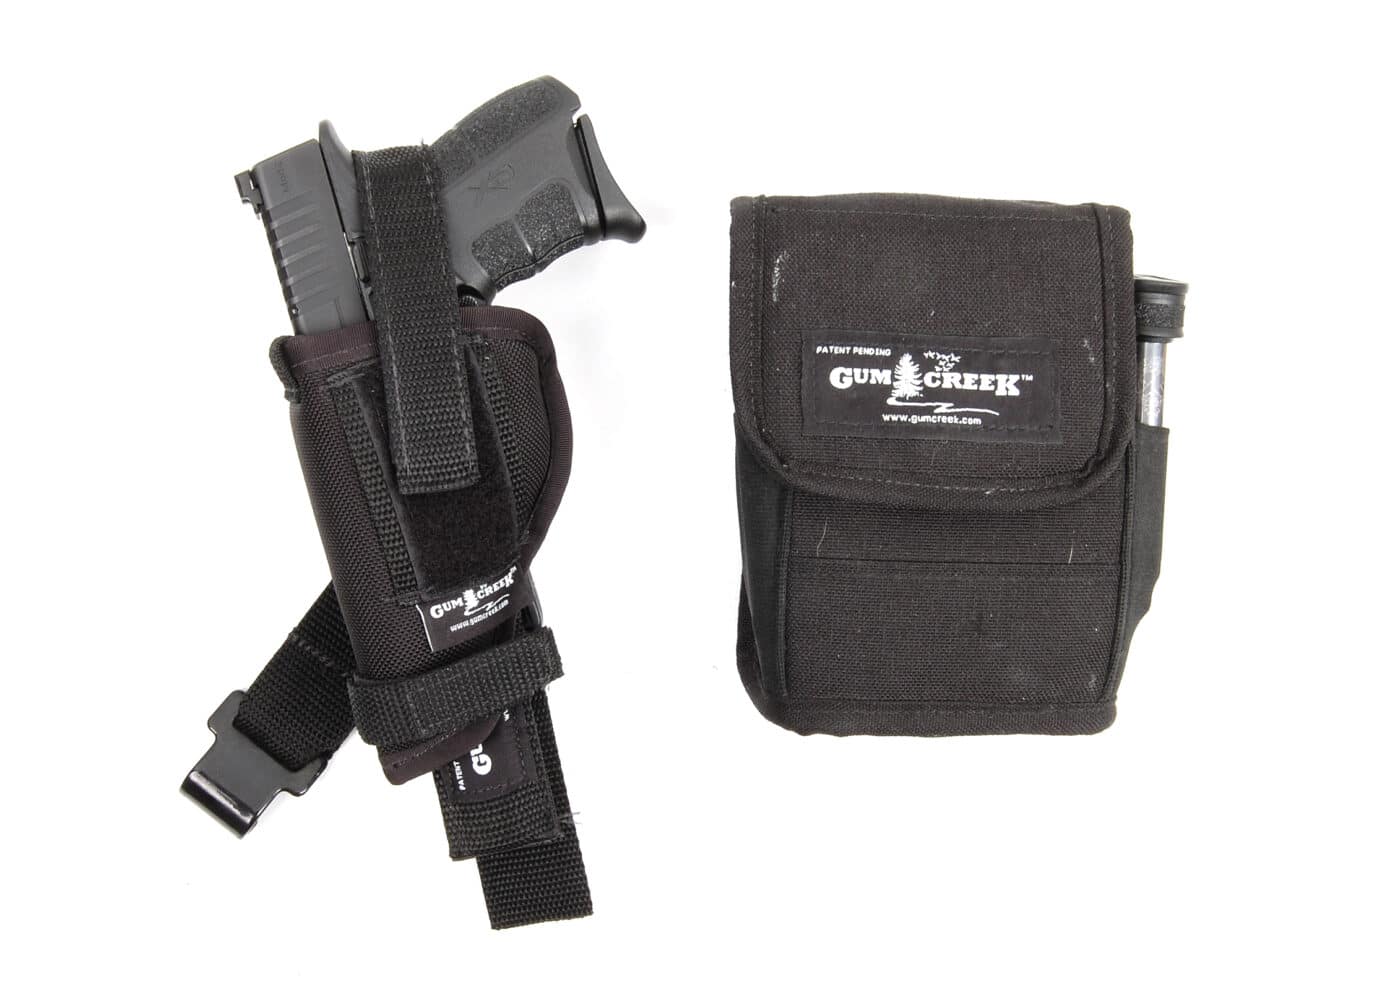 Gum Creek Vehicle Holster with pistol in it